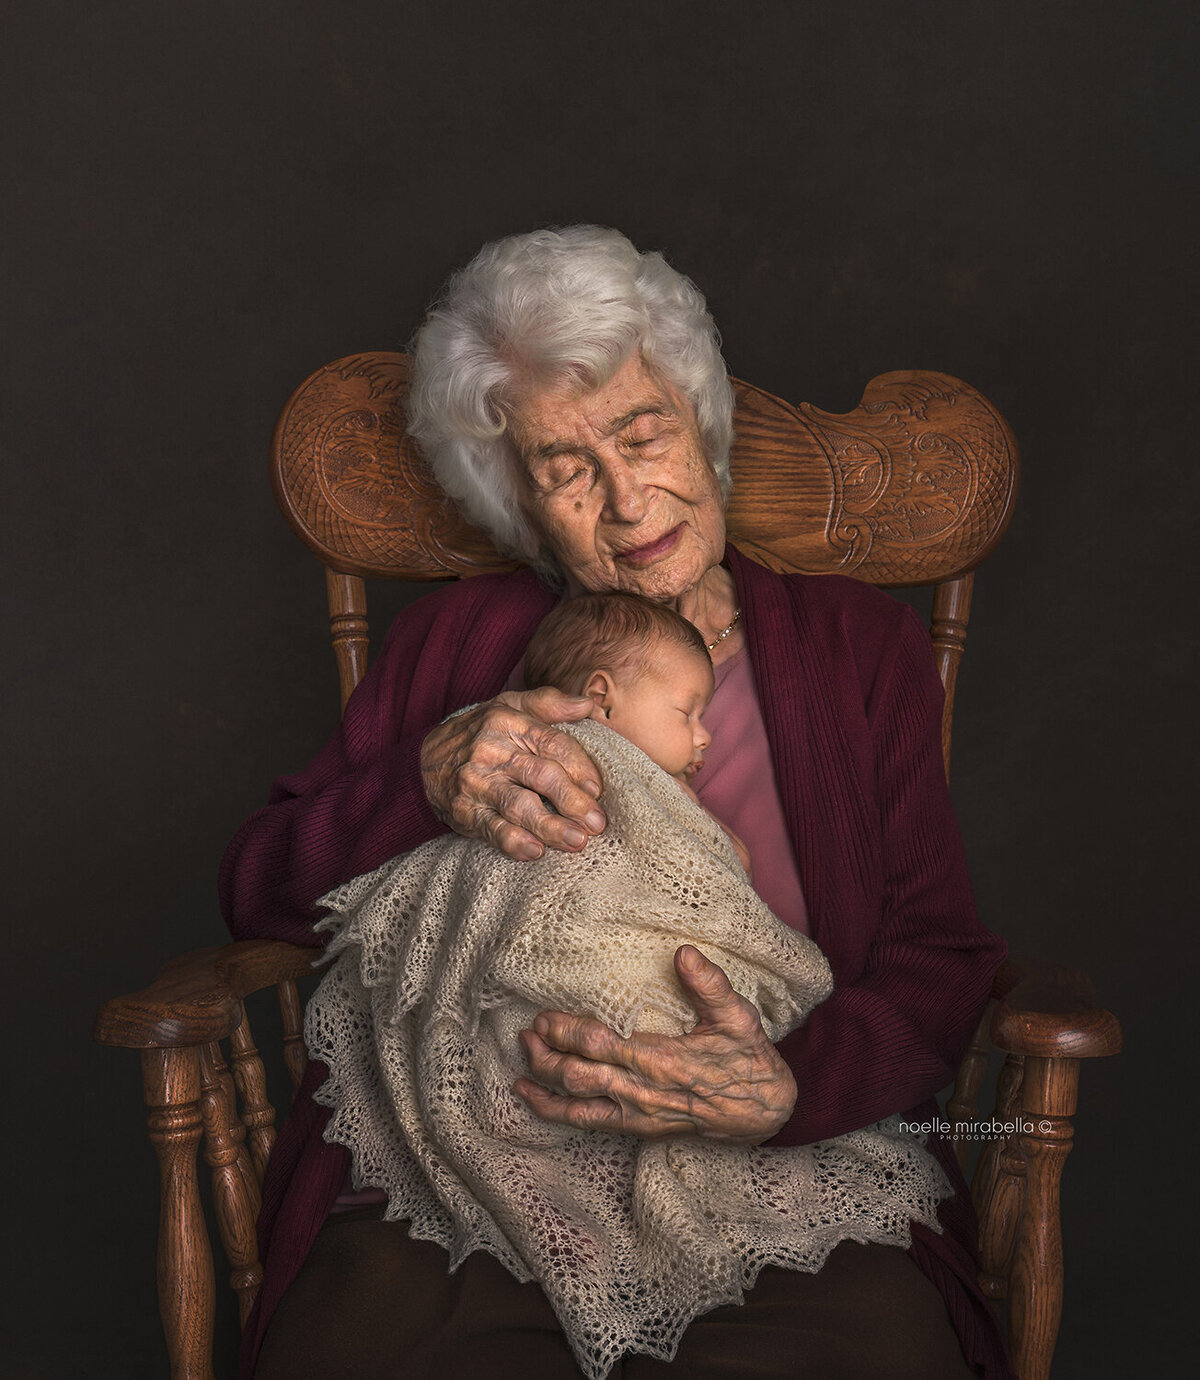 100 year old woman sitting in a rocking chair holding newborn baby. Pink and burgundy tones. Classic portrait.